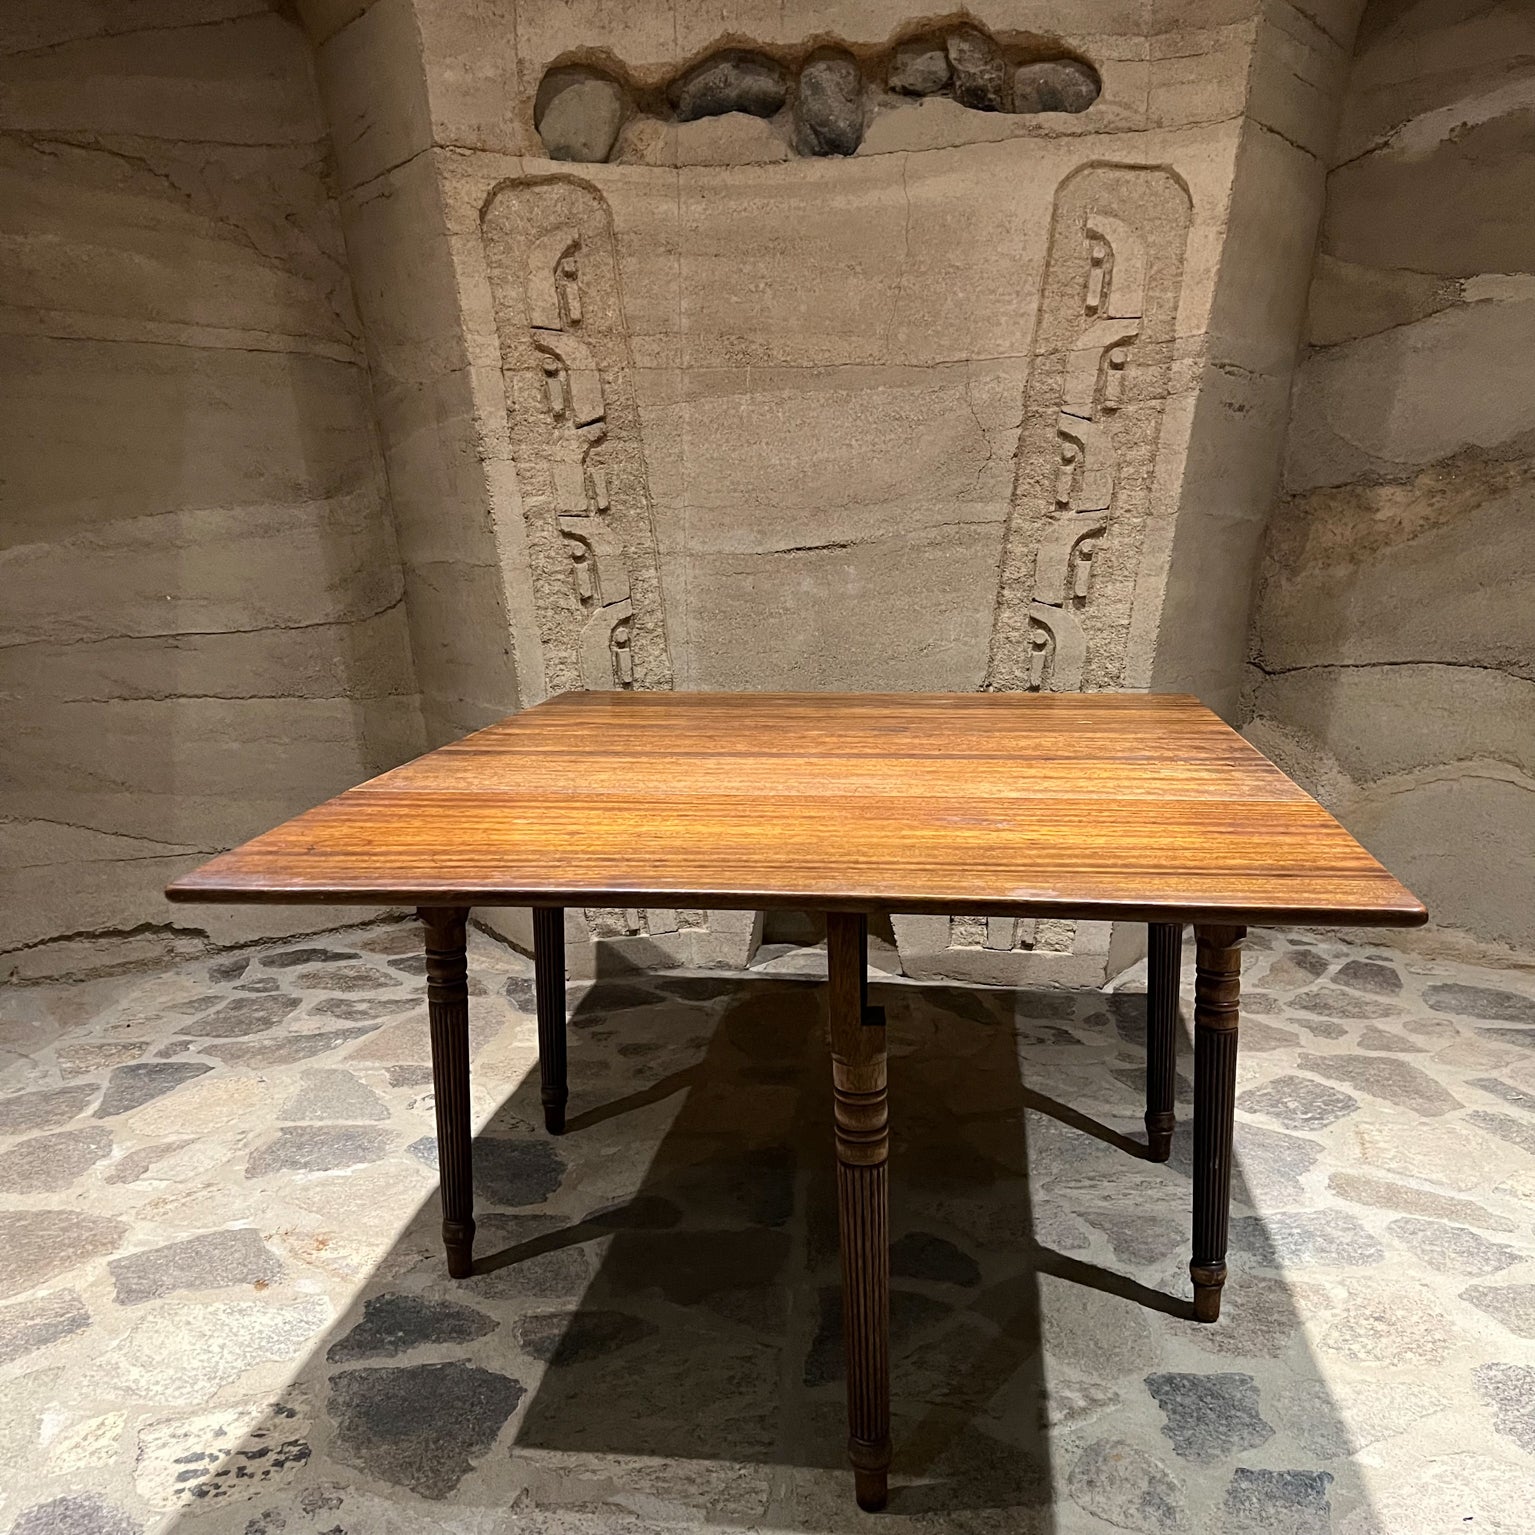 1920s Fine gateleg drop leaf solid mahogany dining table.
Carved sculptural legs.
Rich wood grain.
Measures: 27.5 tall x 48 D x 25.75 W closed and 61.5 W fully extended.
Original vintage unrestored condition. Blemishes present. Vintage patina